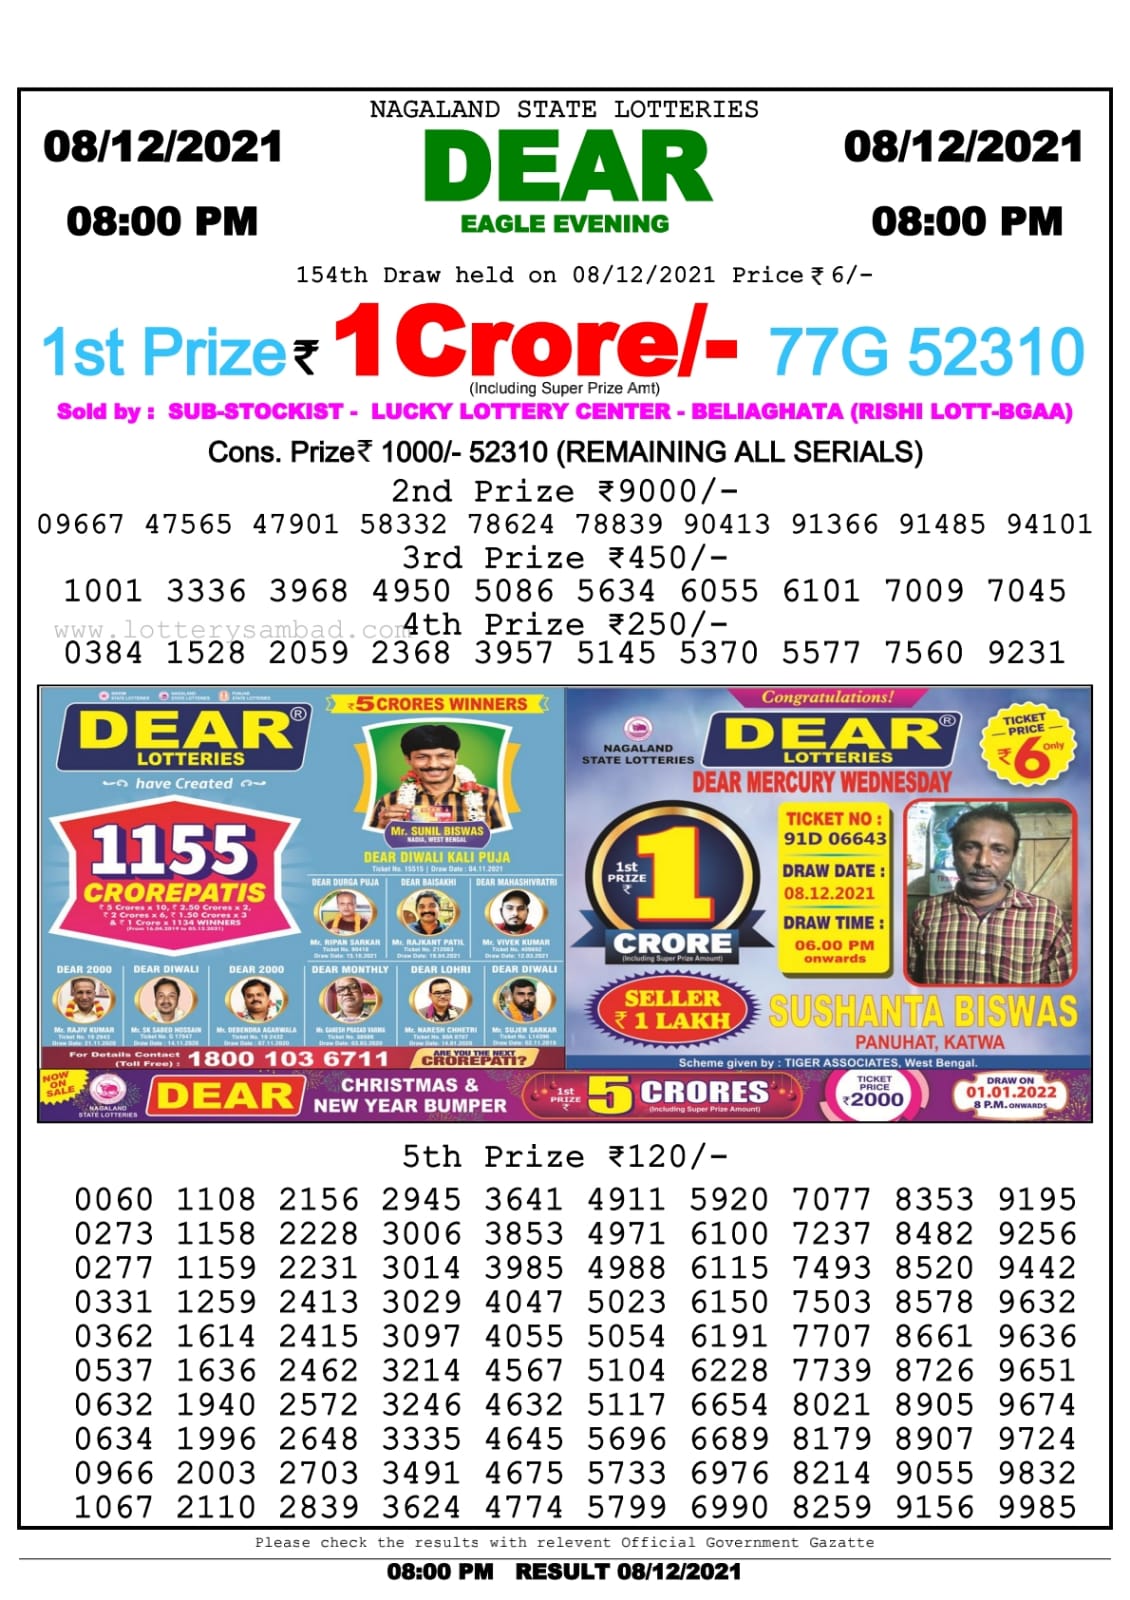 Dear Lottery Nagaland State Lottery Today 8:00 PM 08-12-2021